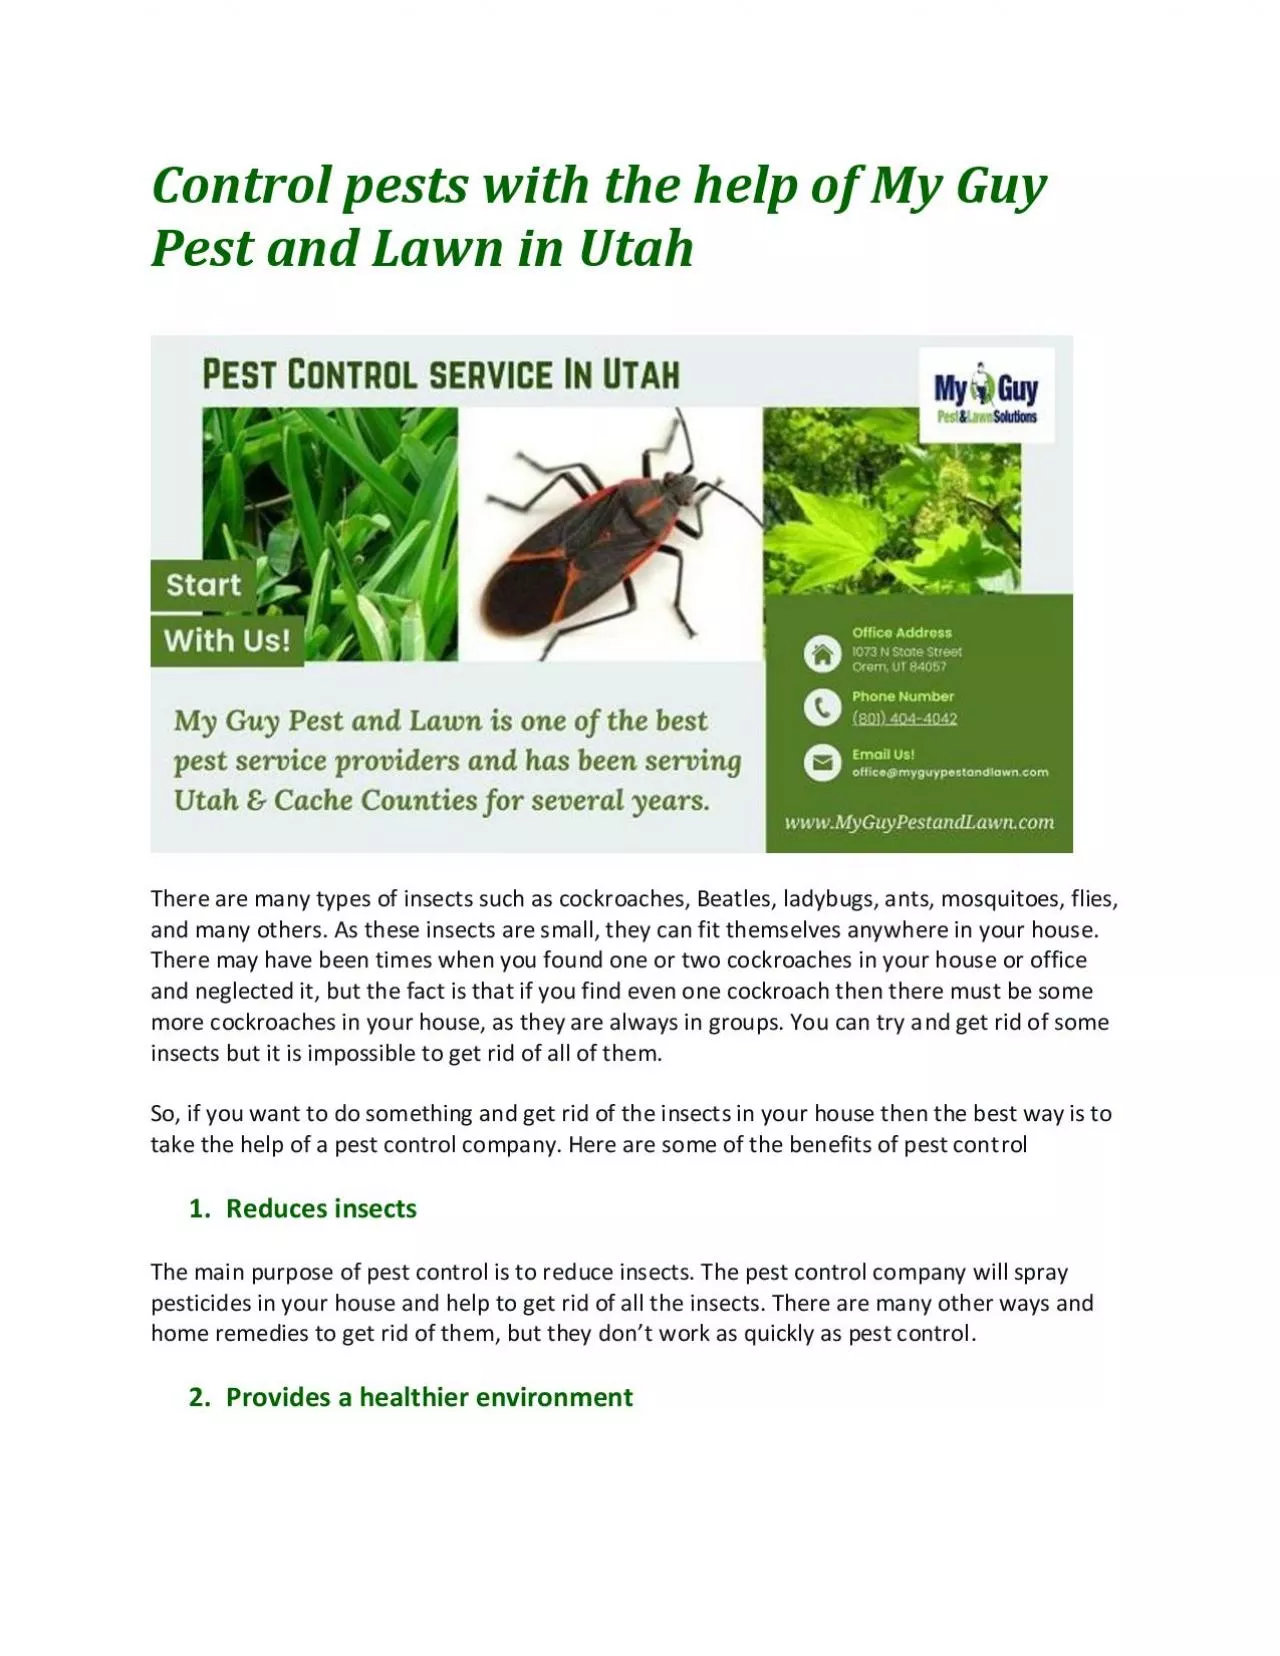 Control pests with the help of My Guy Pest and Lawn in Utah